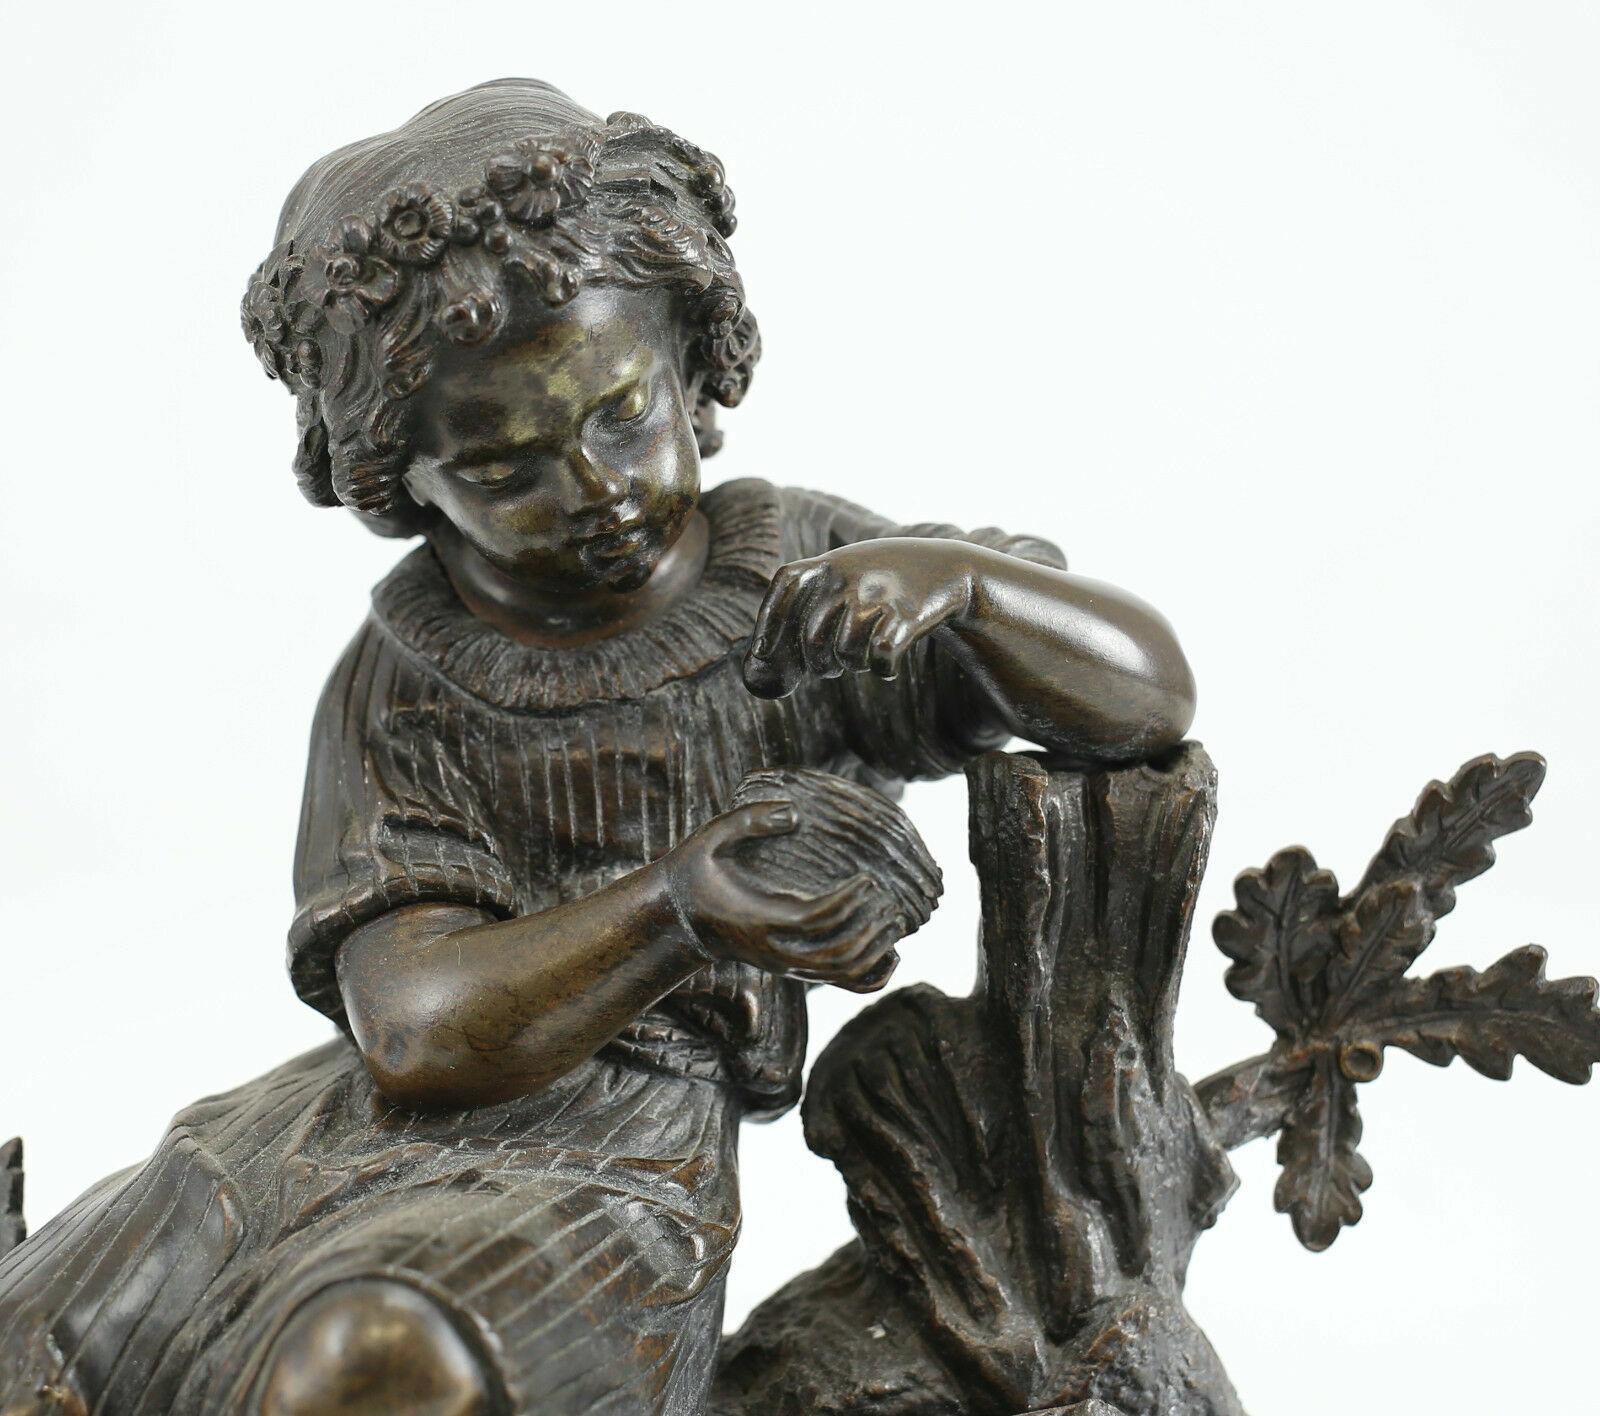 Patinated bronze figurative sculpture girl with bird egg & nest, 19th century 

This beautiful Sculpture depicts a girl gently picking up an egg in a nest of birds with her basket of delicately forgotten flowers spilling over beside her.